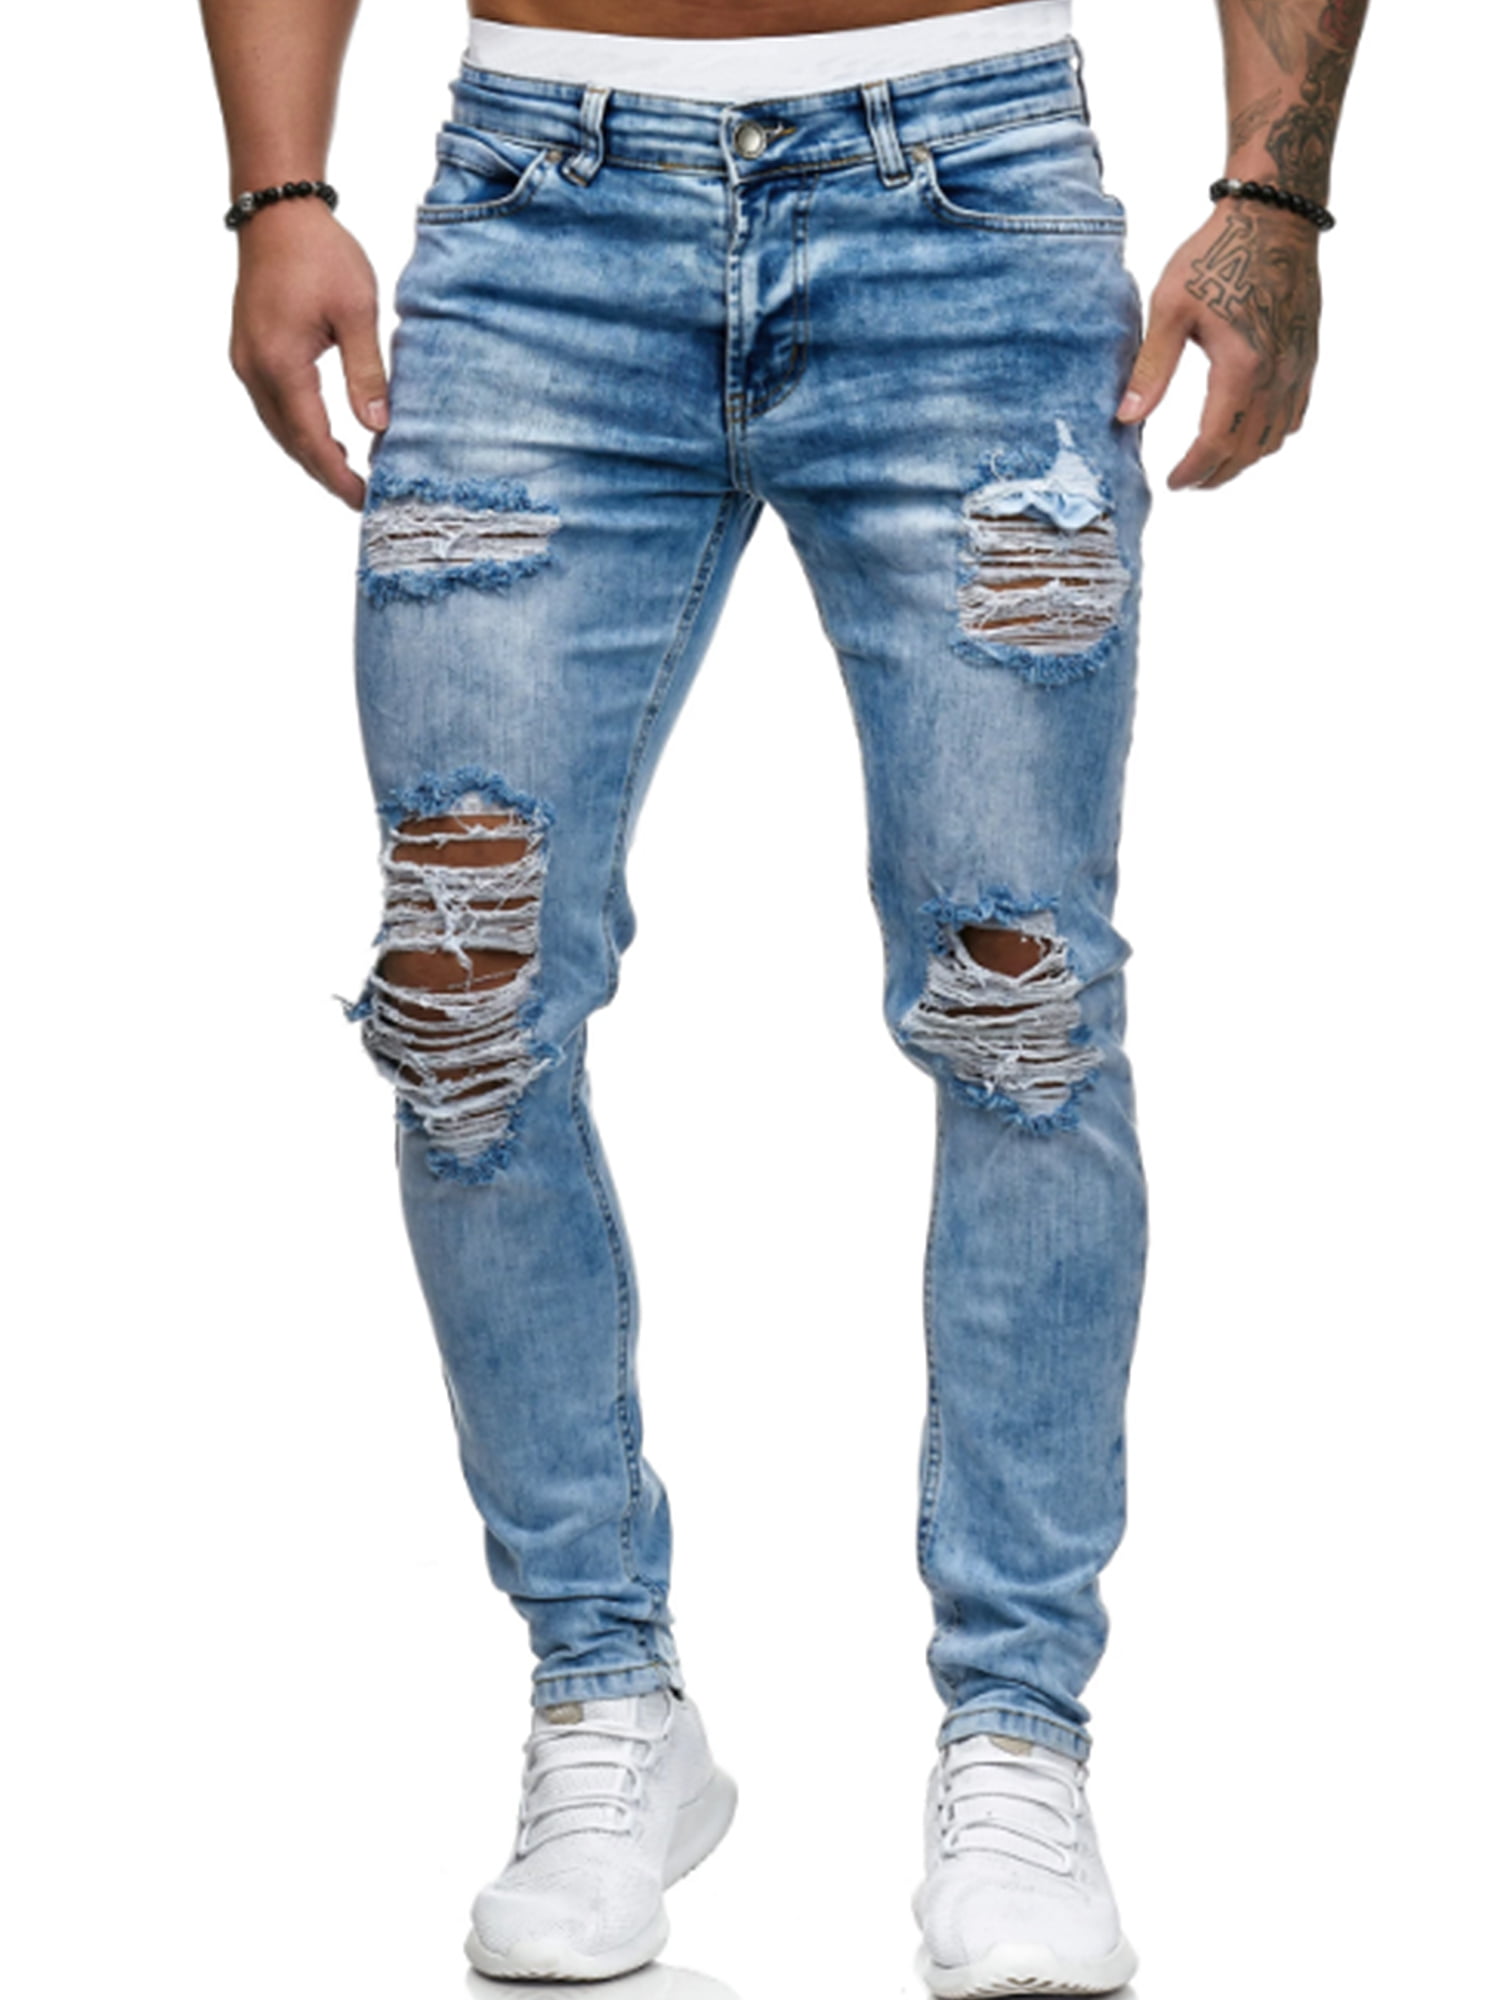 US Mens Casual Slim Stretch Denim Jeans Destroyed Ripped Skinny Pants Trousers 